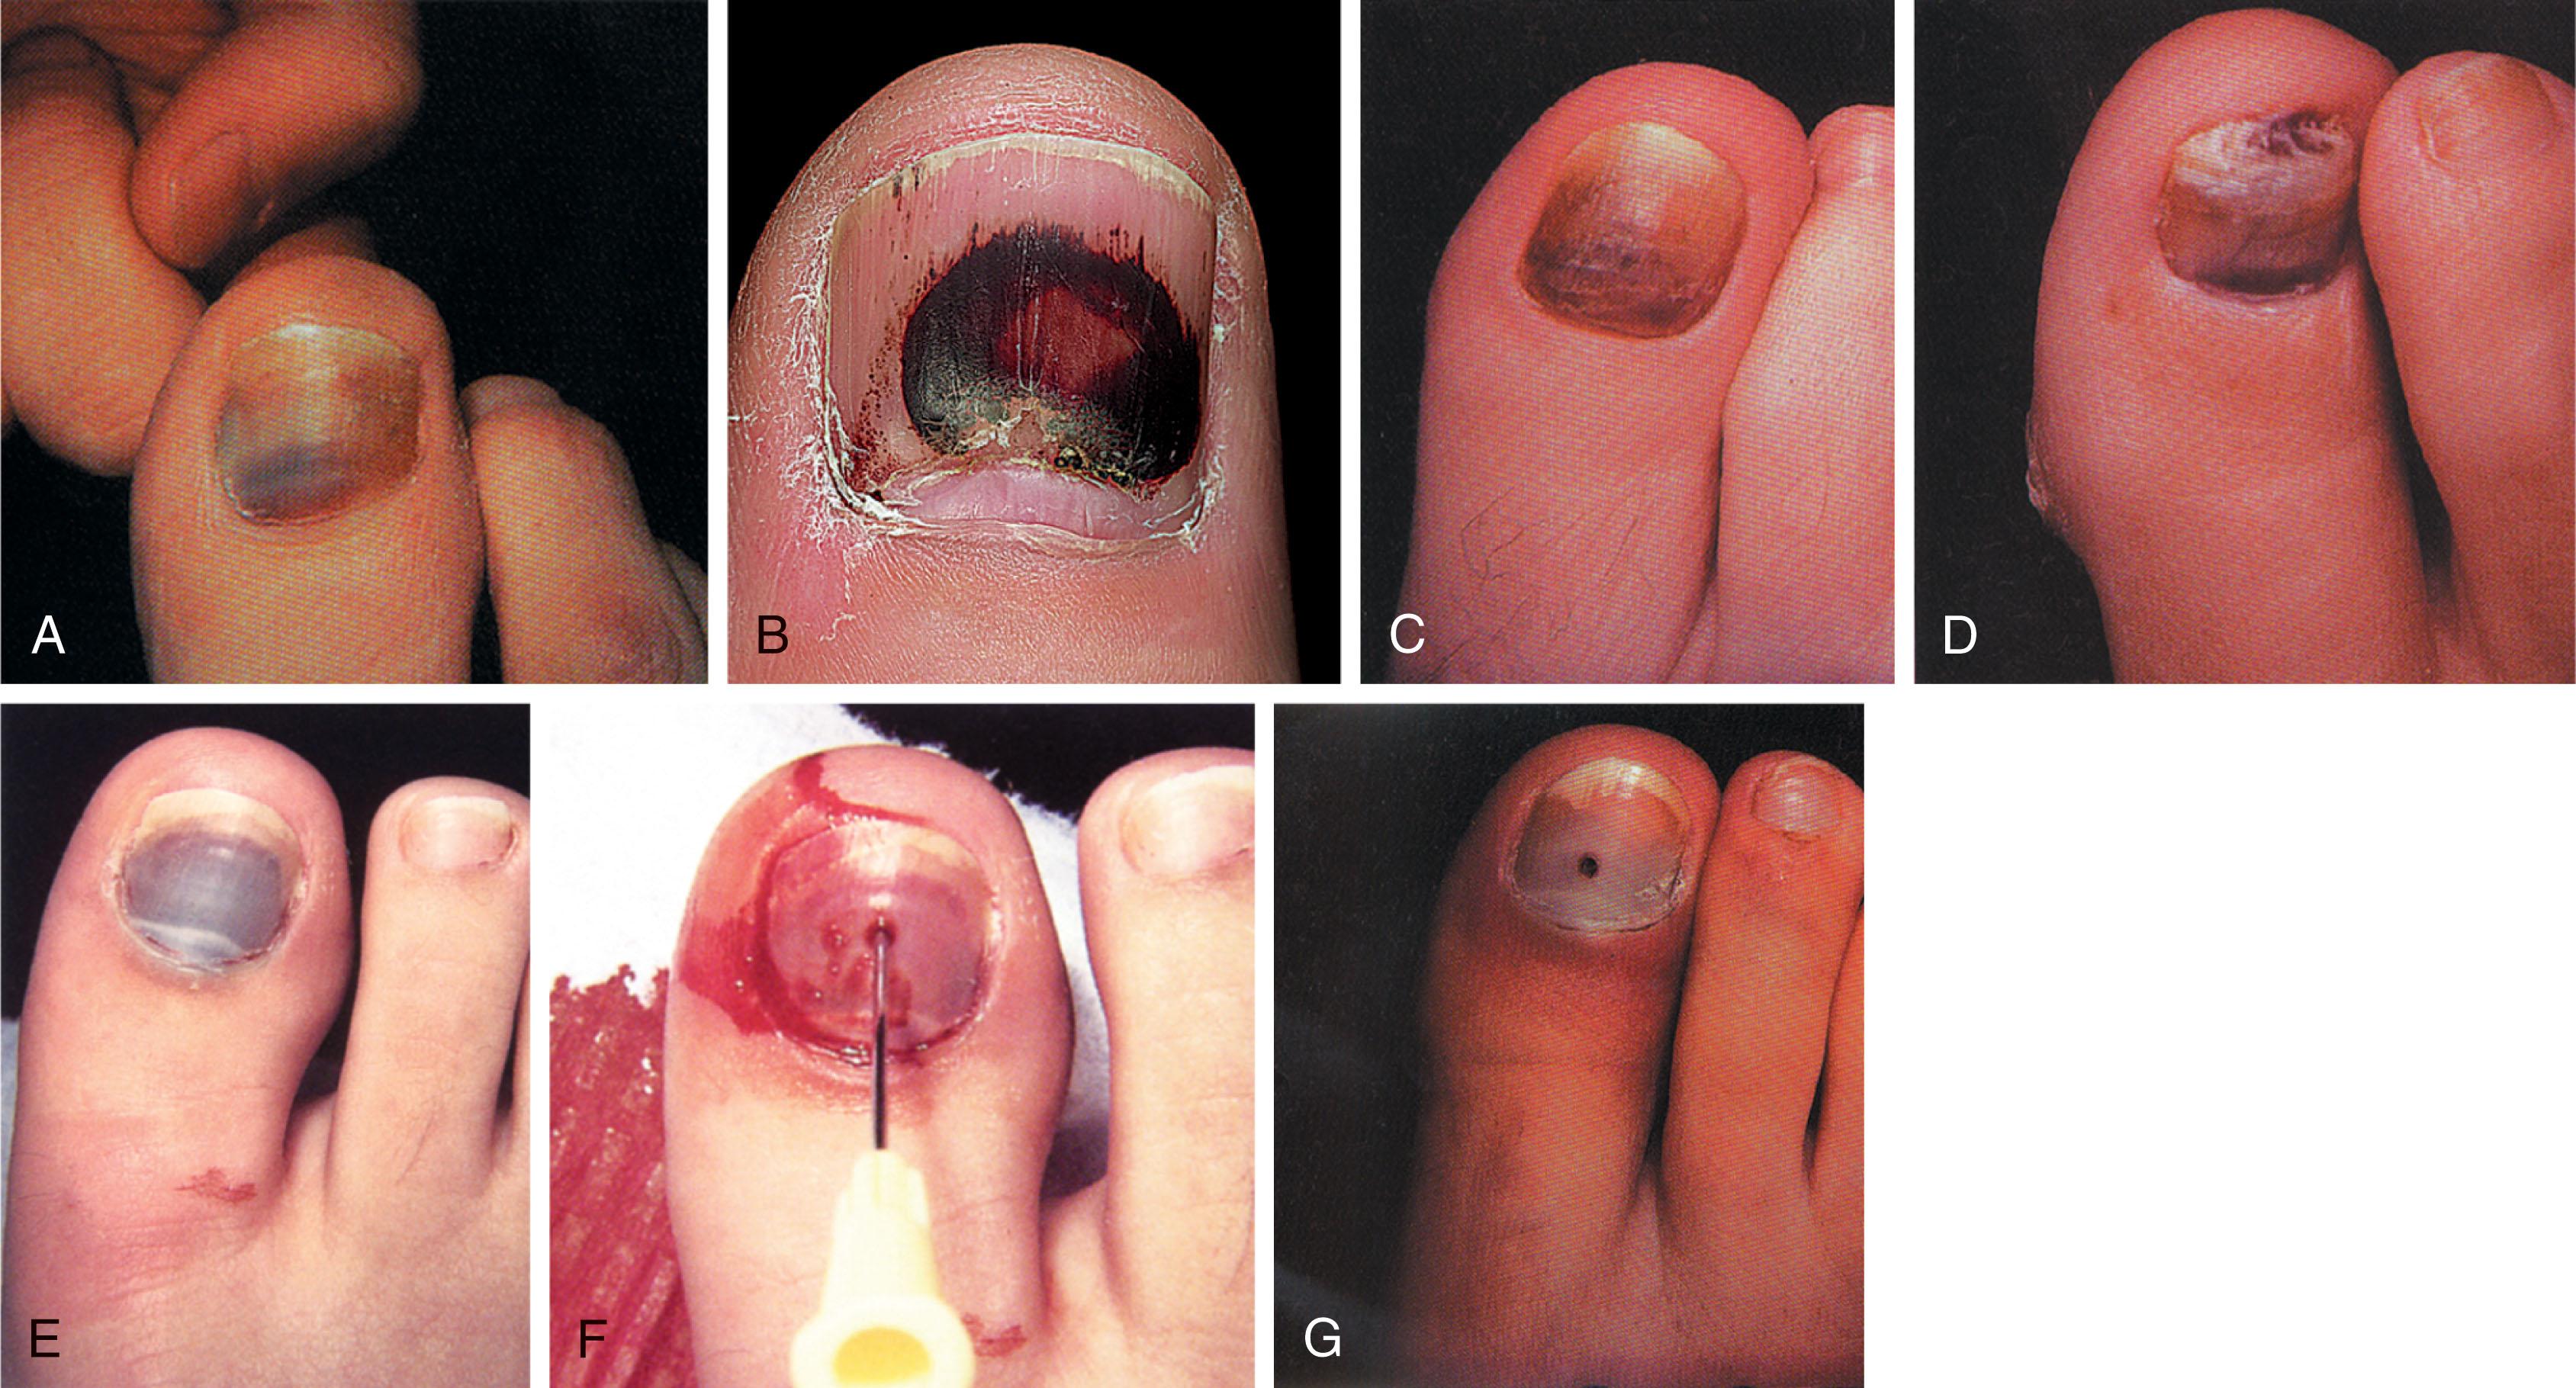 Fig. 14-12, Subungual hematoma (subacute and acute). A , Typical subacute appearance of subungual hemorrhage after direct trauma to toenail. B , When there is considerable pain or swelling under the nail after hematoma formation, the hematoma may be released. With time, the hematoma evolves, and the subungual blood turns brown or black. This may take months to resolve. Melanoma can have a similar appearance, and the history is important. C , Accumulation of blood beneath the nail after trauma. The staining will persist until the nail grows out. D , Subacute appearance of hemorrhage with accumulation of debris beneath the nail. E , Acute subungual hematoma. F , A small hole created in the nail allows blood to drain, but the procedure must be done soon after injury because coagulated blood cannot be drained. G , After removal of the needle.